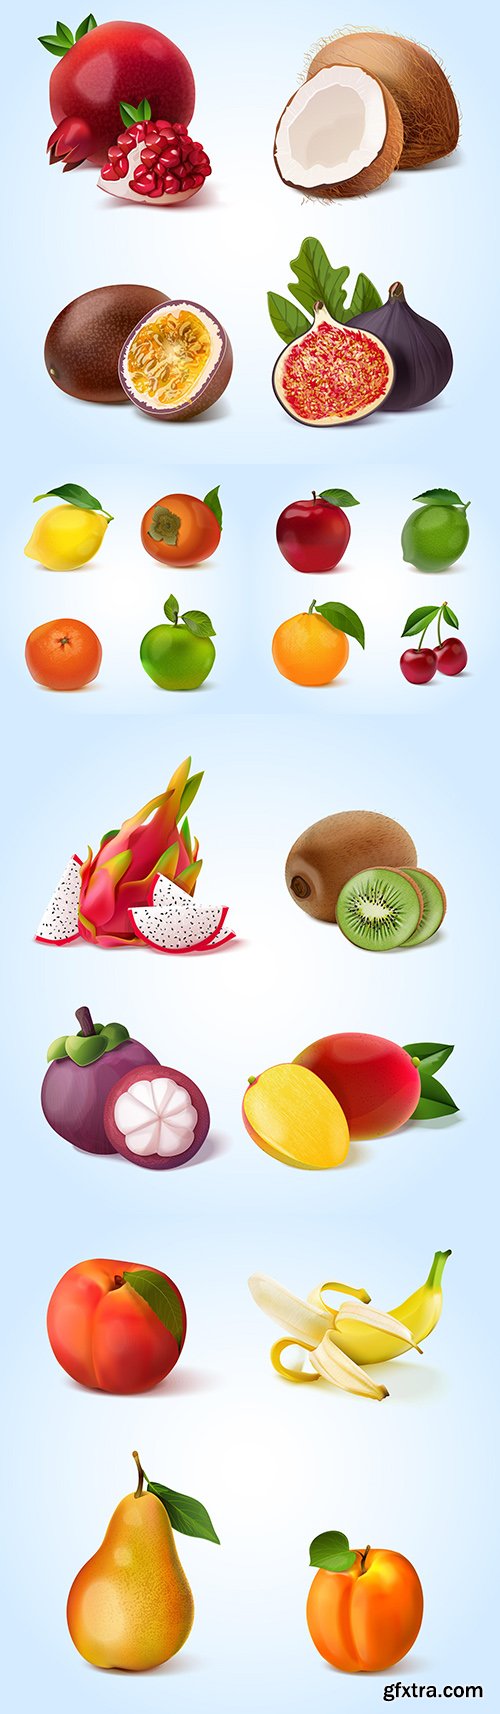 Realistic collection of ripe and tropical fruit illustrations
